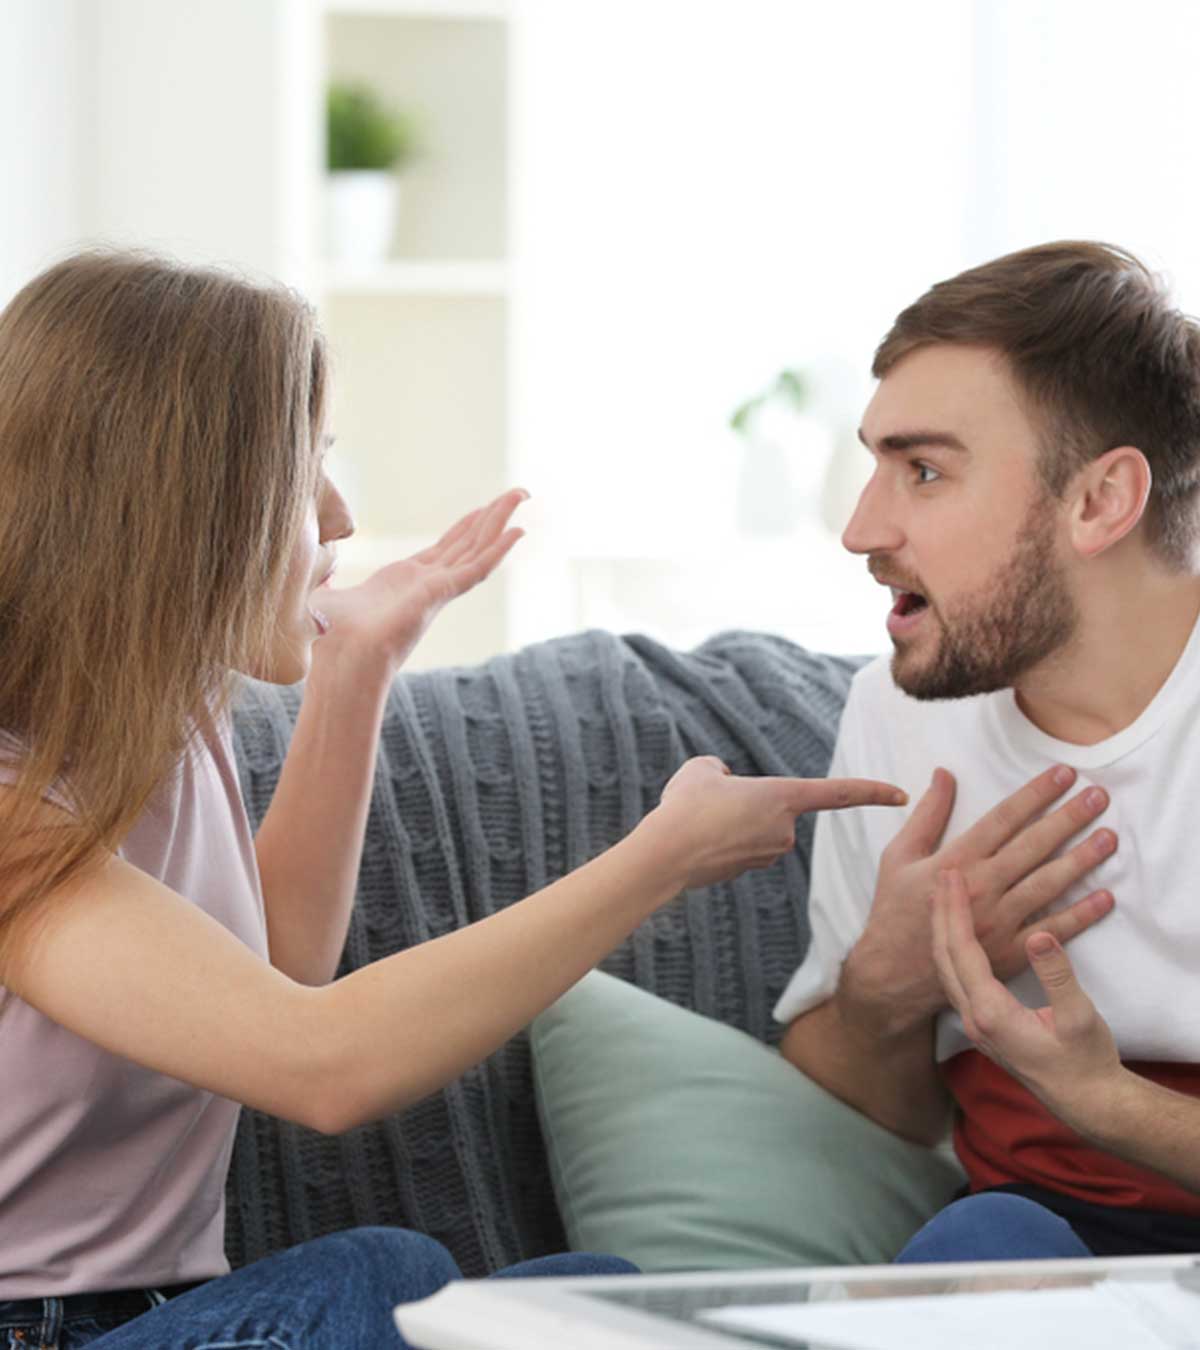 12 Signs Of An Abusive Wife And How To Deal With Her